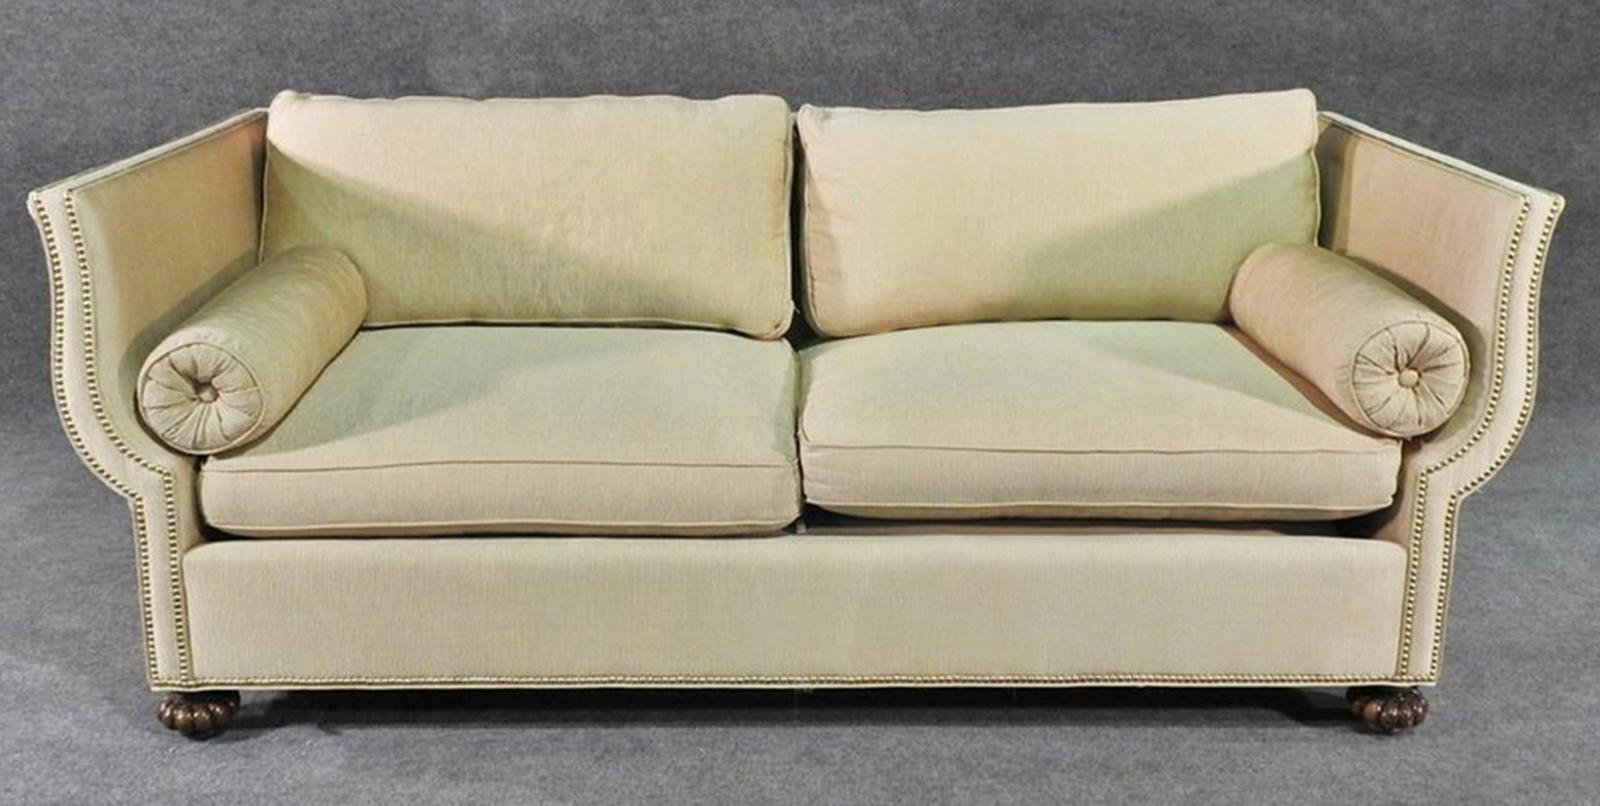 This is one of a matched pair. This is a grand, extremely comfortable sofa. You can easily sleep on this sofa and feel comfortable. The sofa is in good condition with the most minor signs of use. Measures: 34 1/2